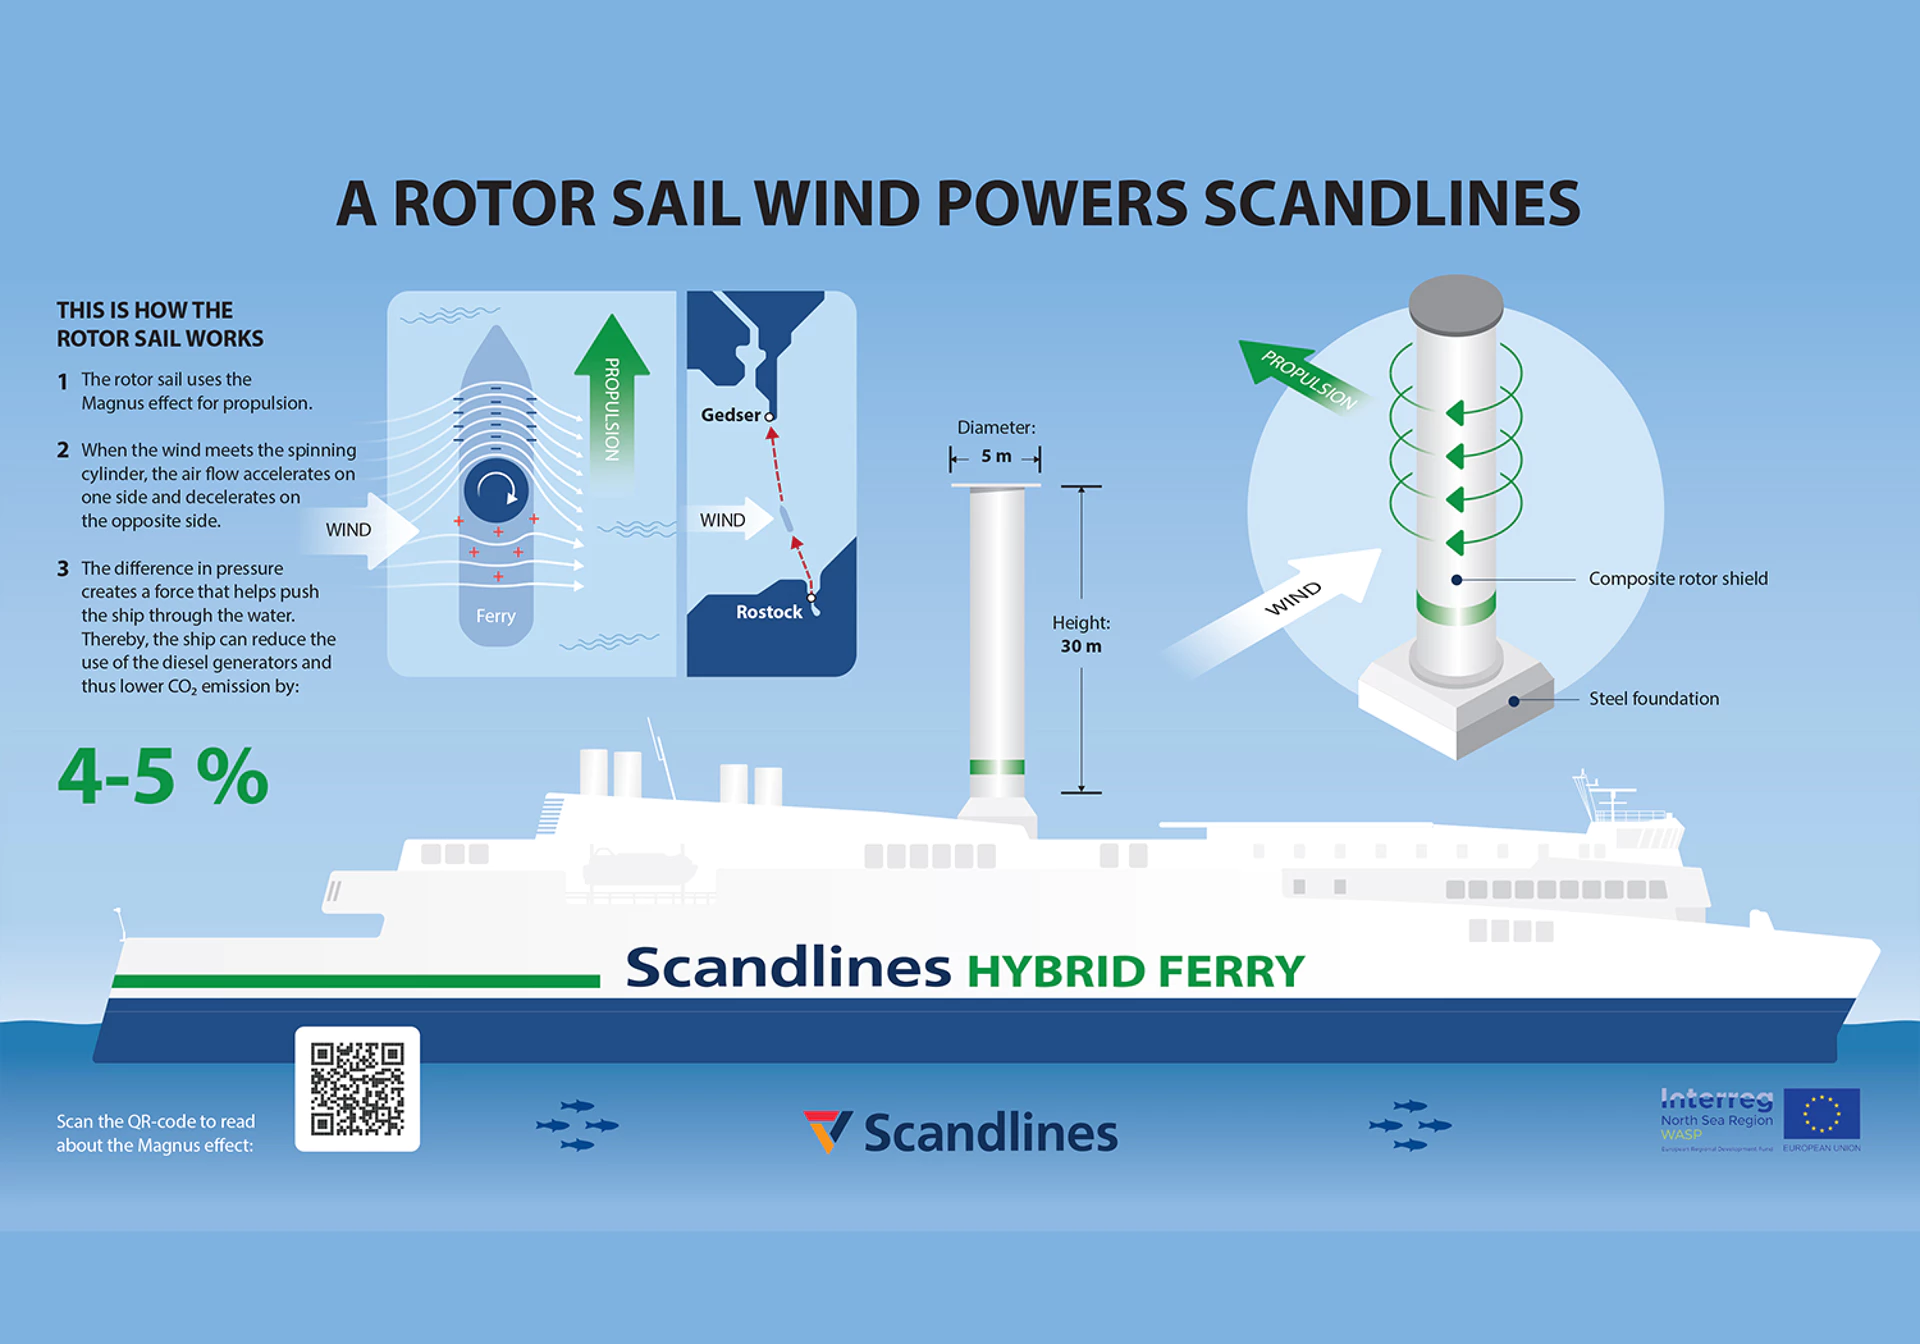 https://www.scandlines.com/about-us/our-green-agenda/powered-by-the-wind/